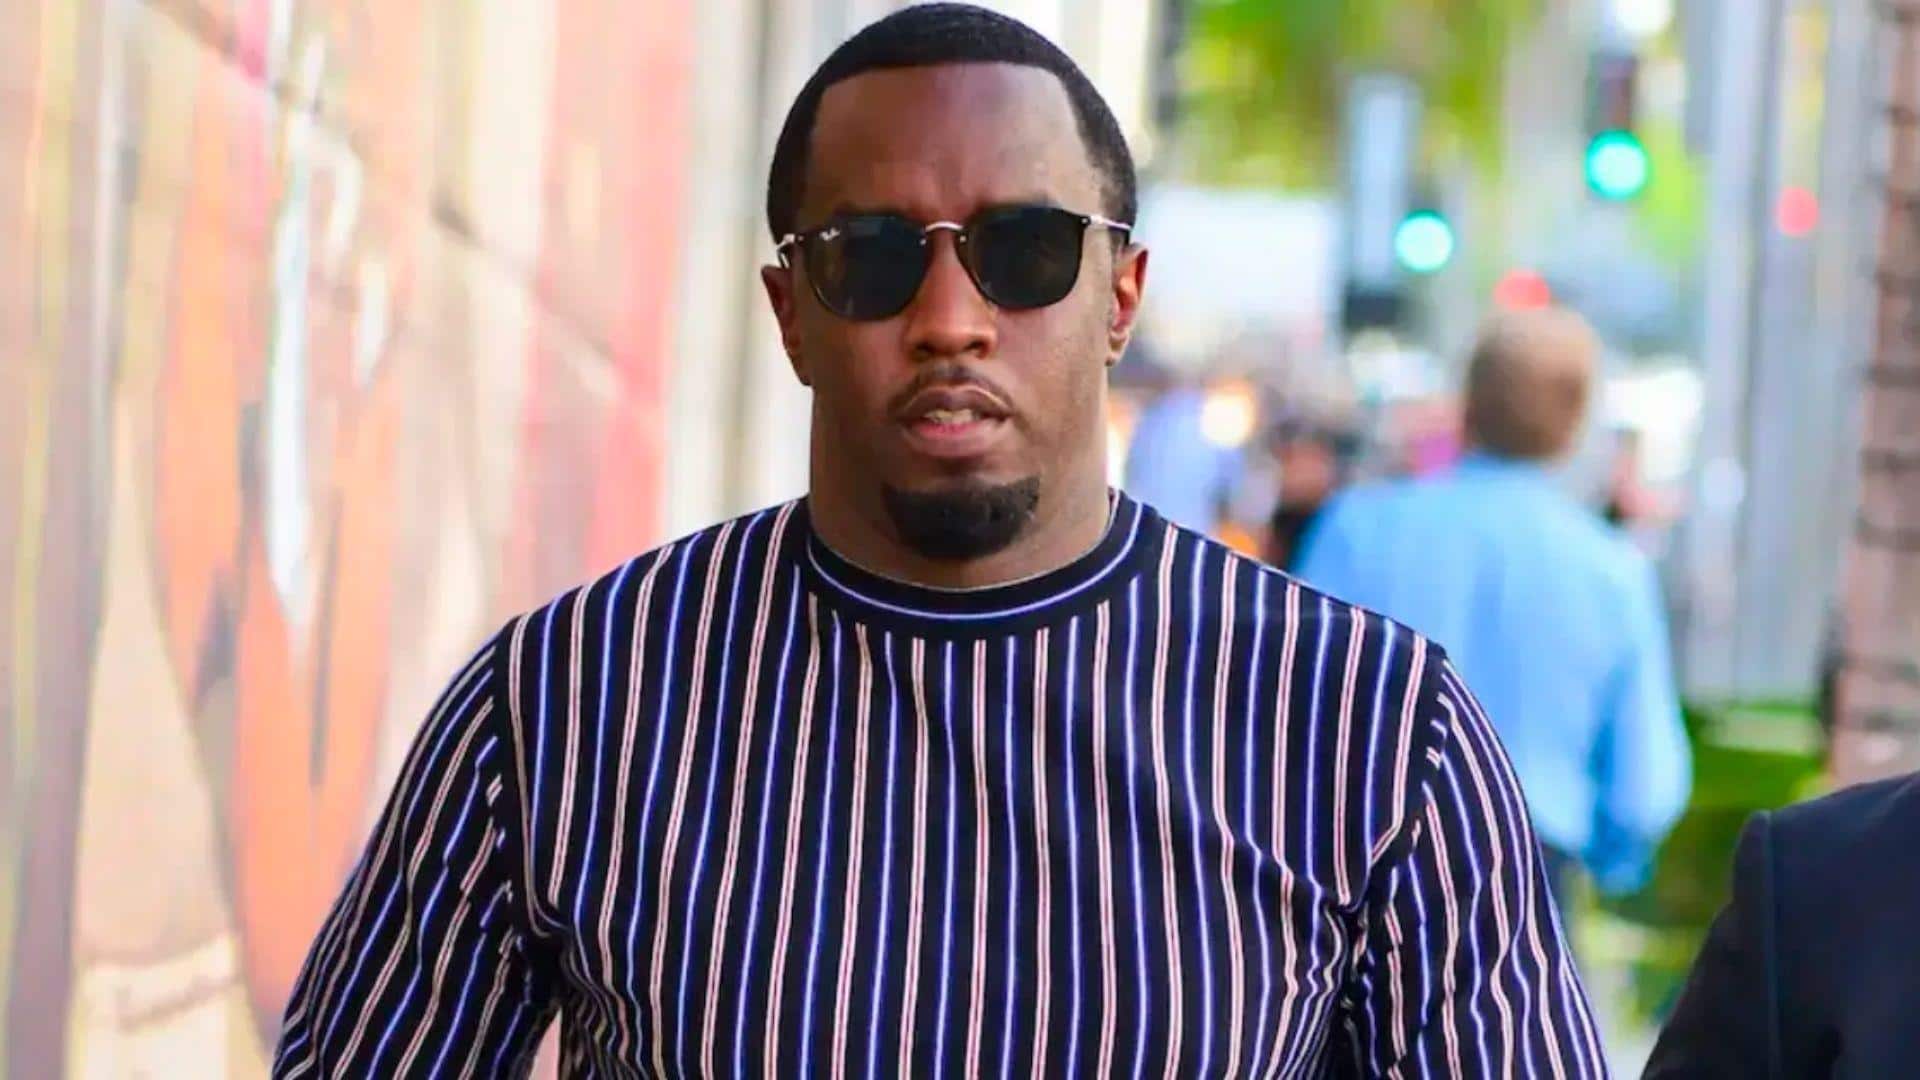 Sean 'Diddy' Combs faces fresh assault allegations from music producer